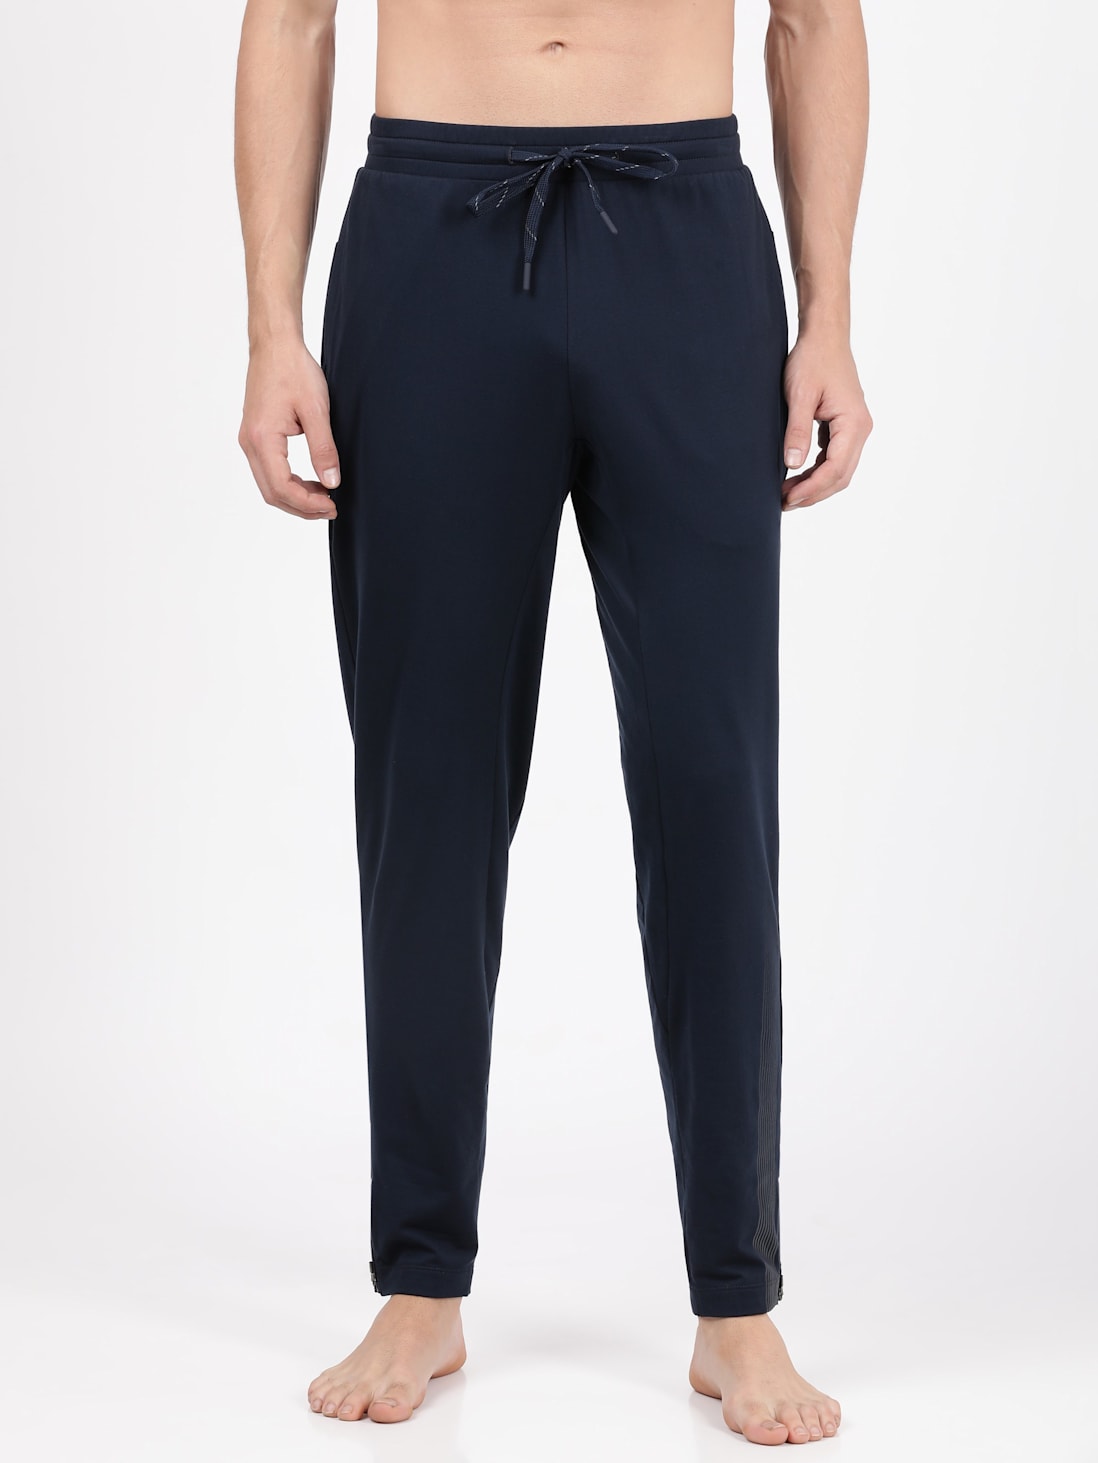 Slim Stretch Fit Trousers - Buy Slim Stretch Fit Trousers online in India